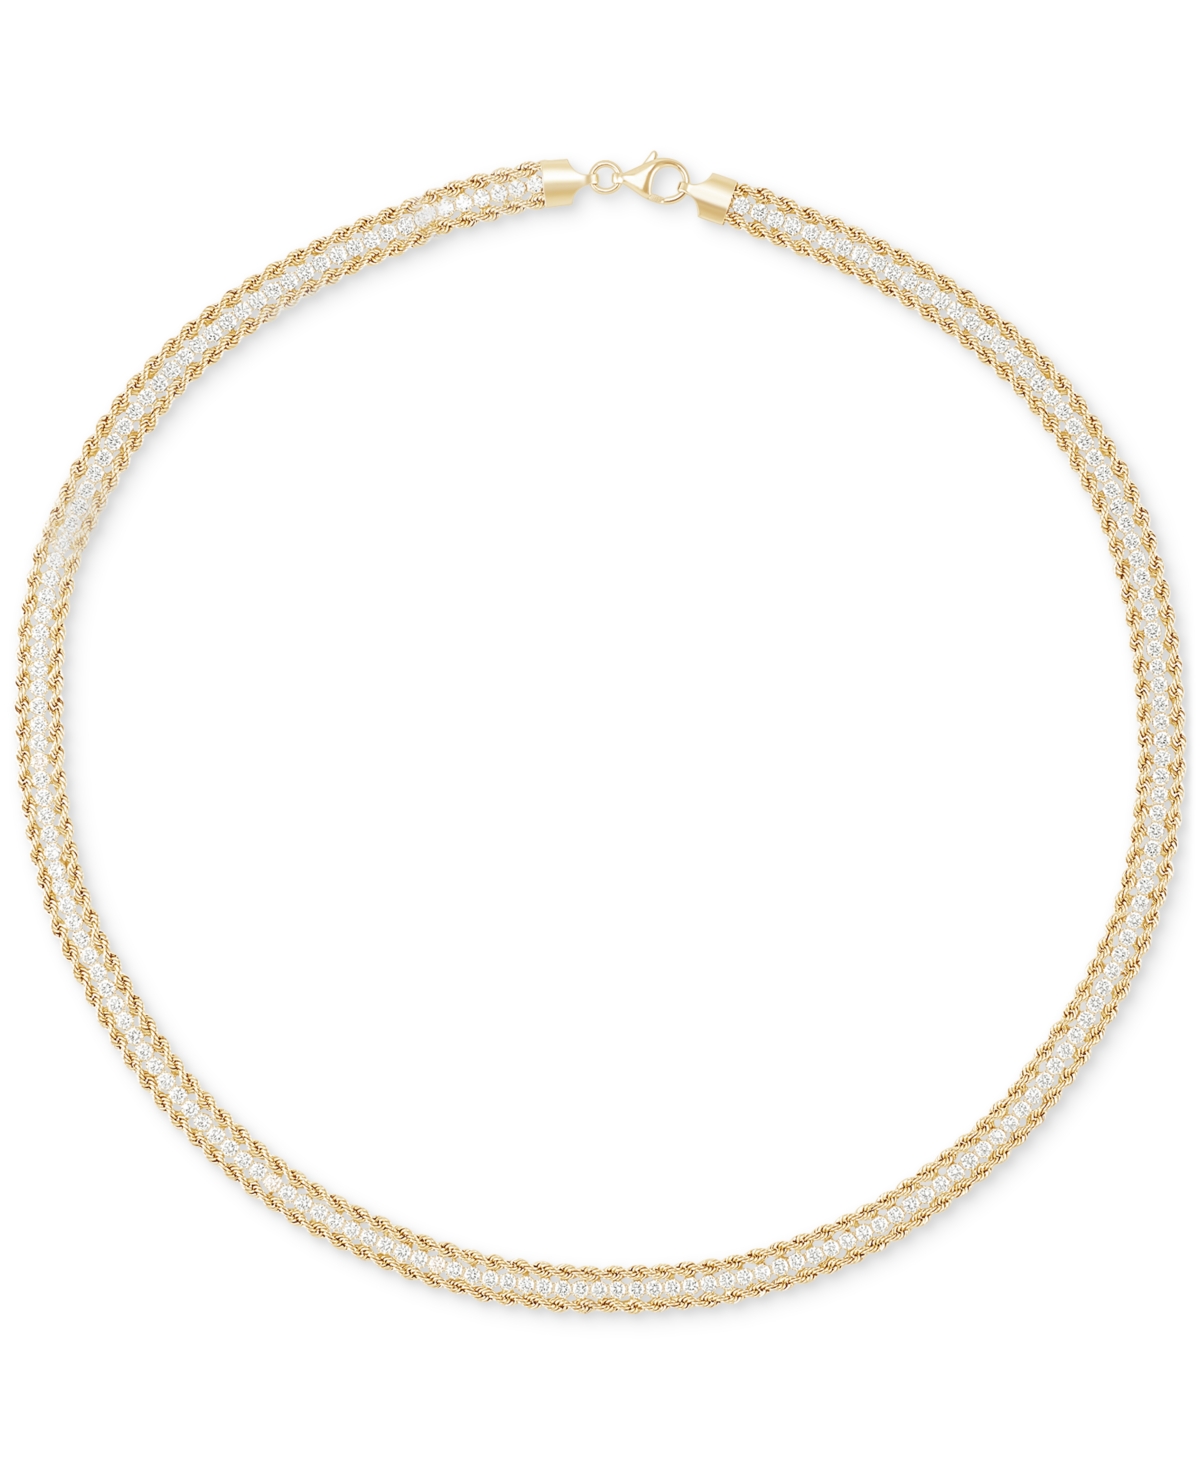 Cubic Zirconia Rope Link 18" Collar Necklace in 14k Gold - Yellow Gold